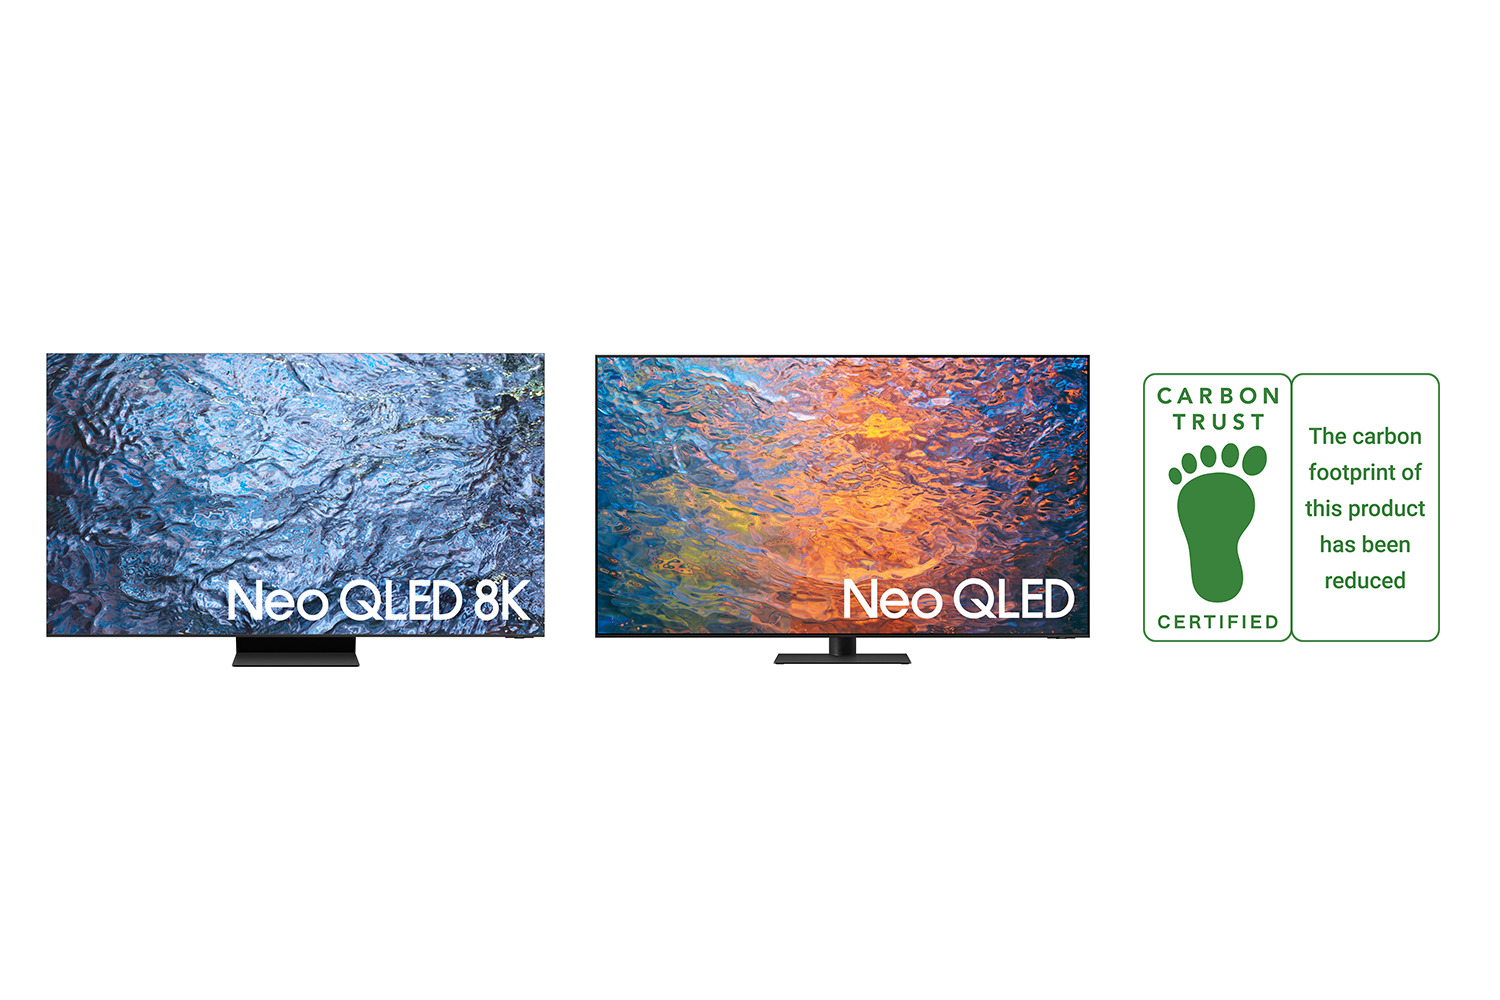 Samsung’s 2023 Neo QLED rewarded by ‘Reducing CO2’ Certification